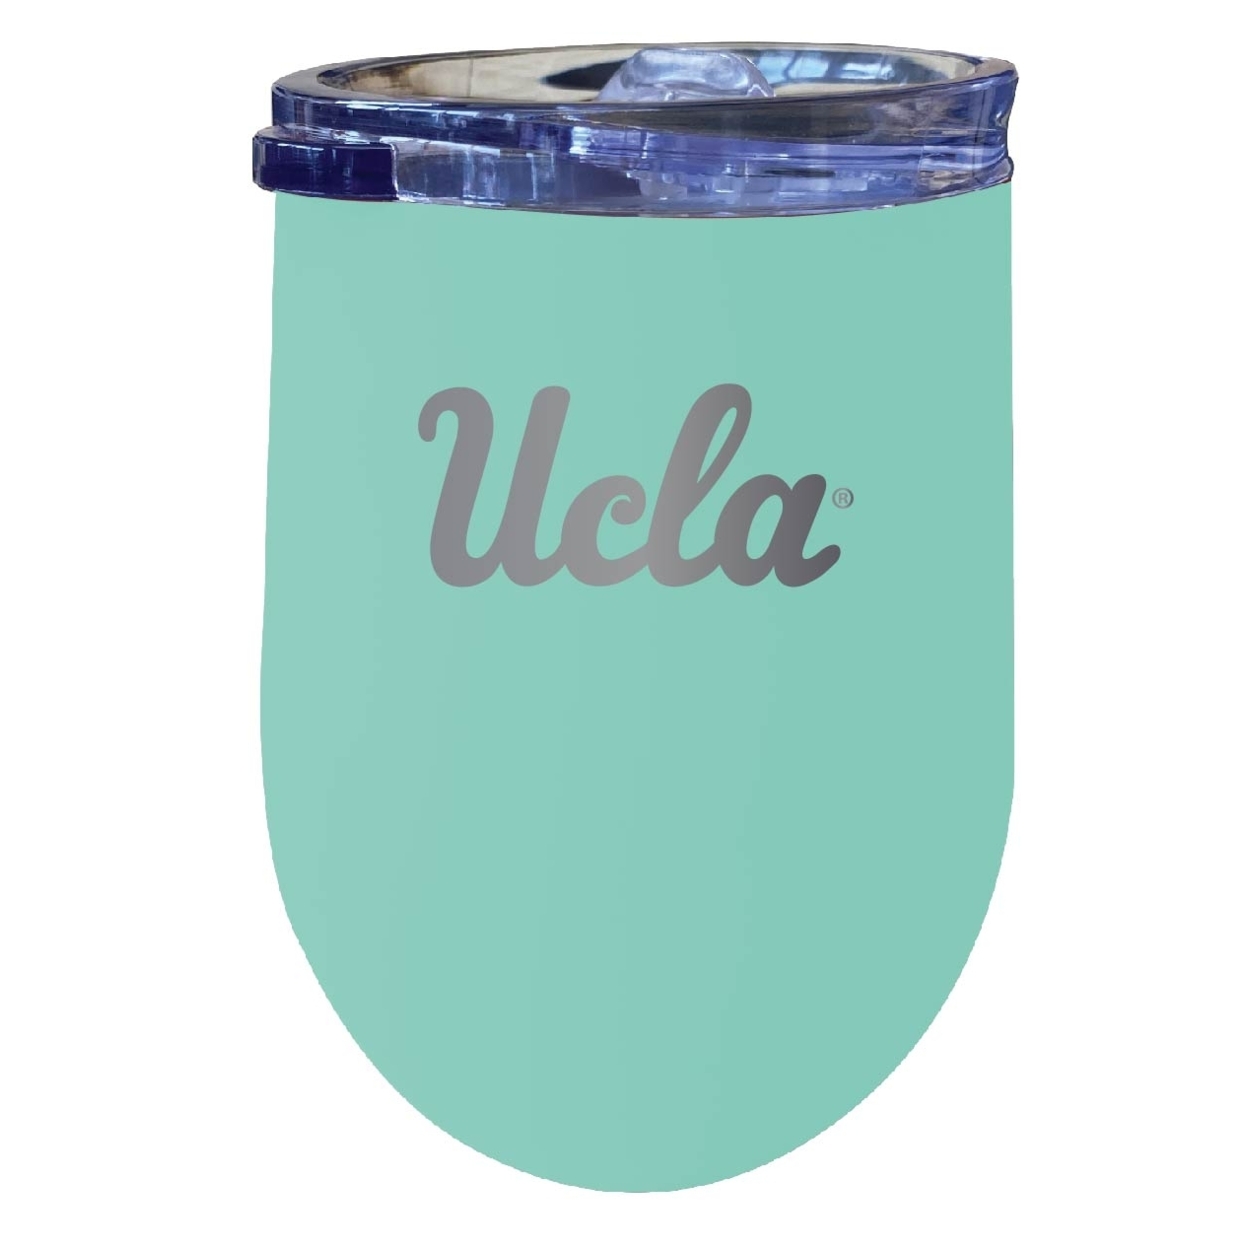 UCLA Bruins 12 Oz Etched Insulated Wine Stainless Steel Tumbler - Choose Your Color - Seafoam